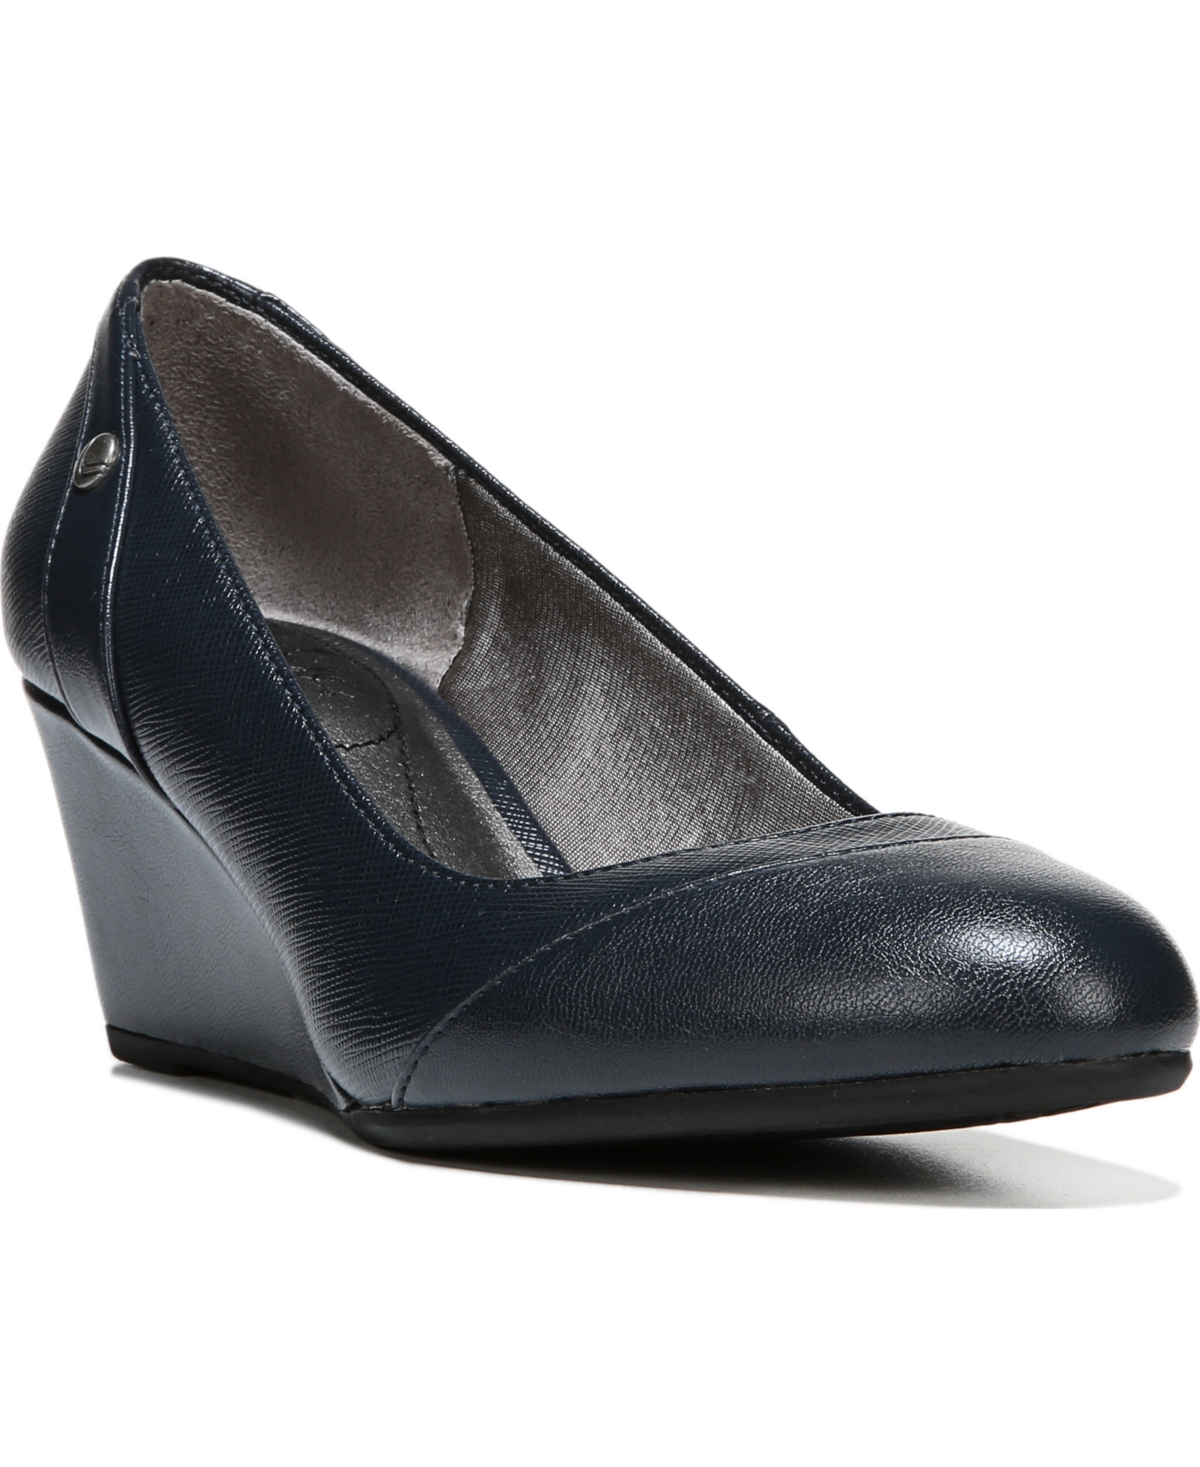 Lifestride Dreams Wedge Pumps In Classic Navy